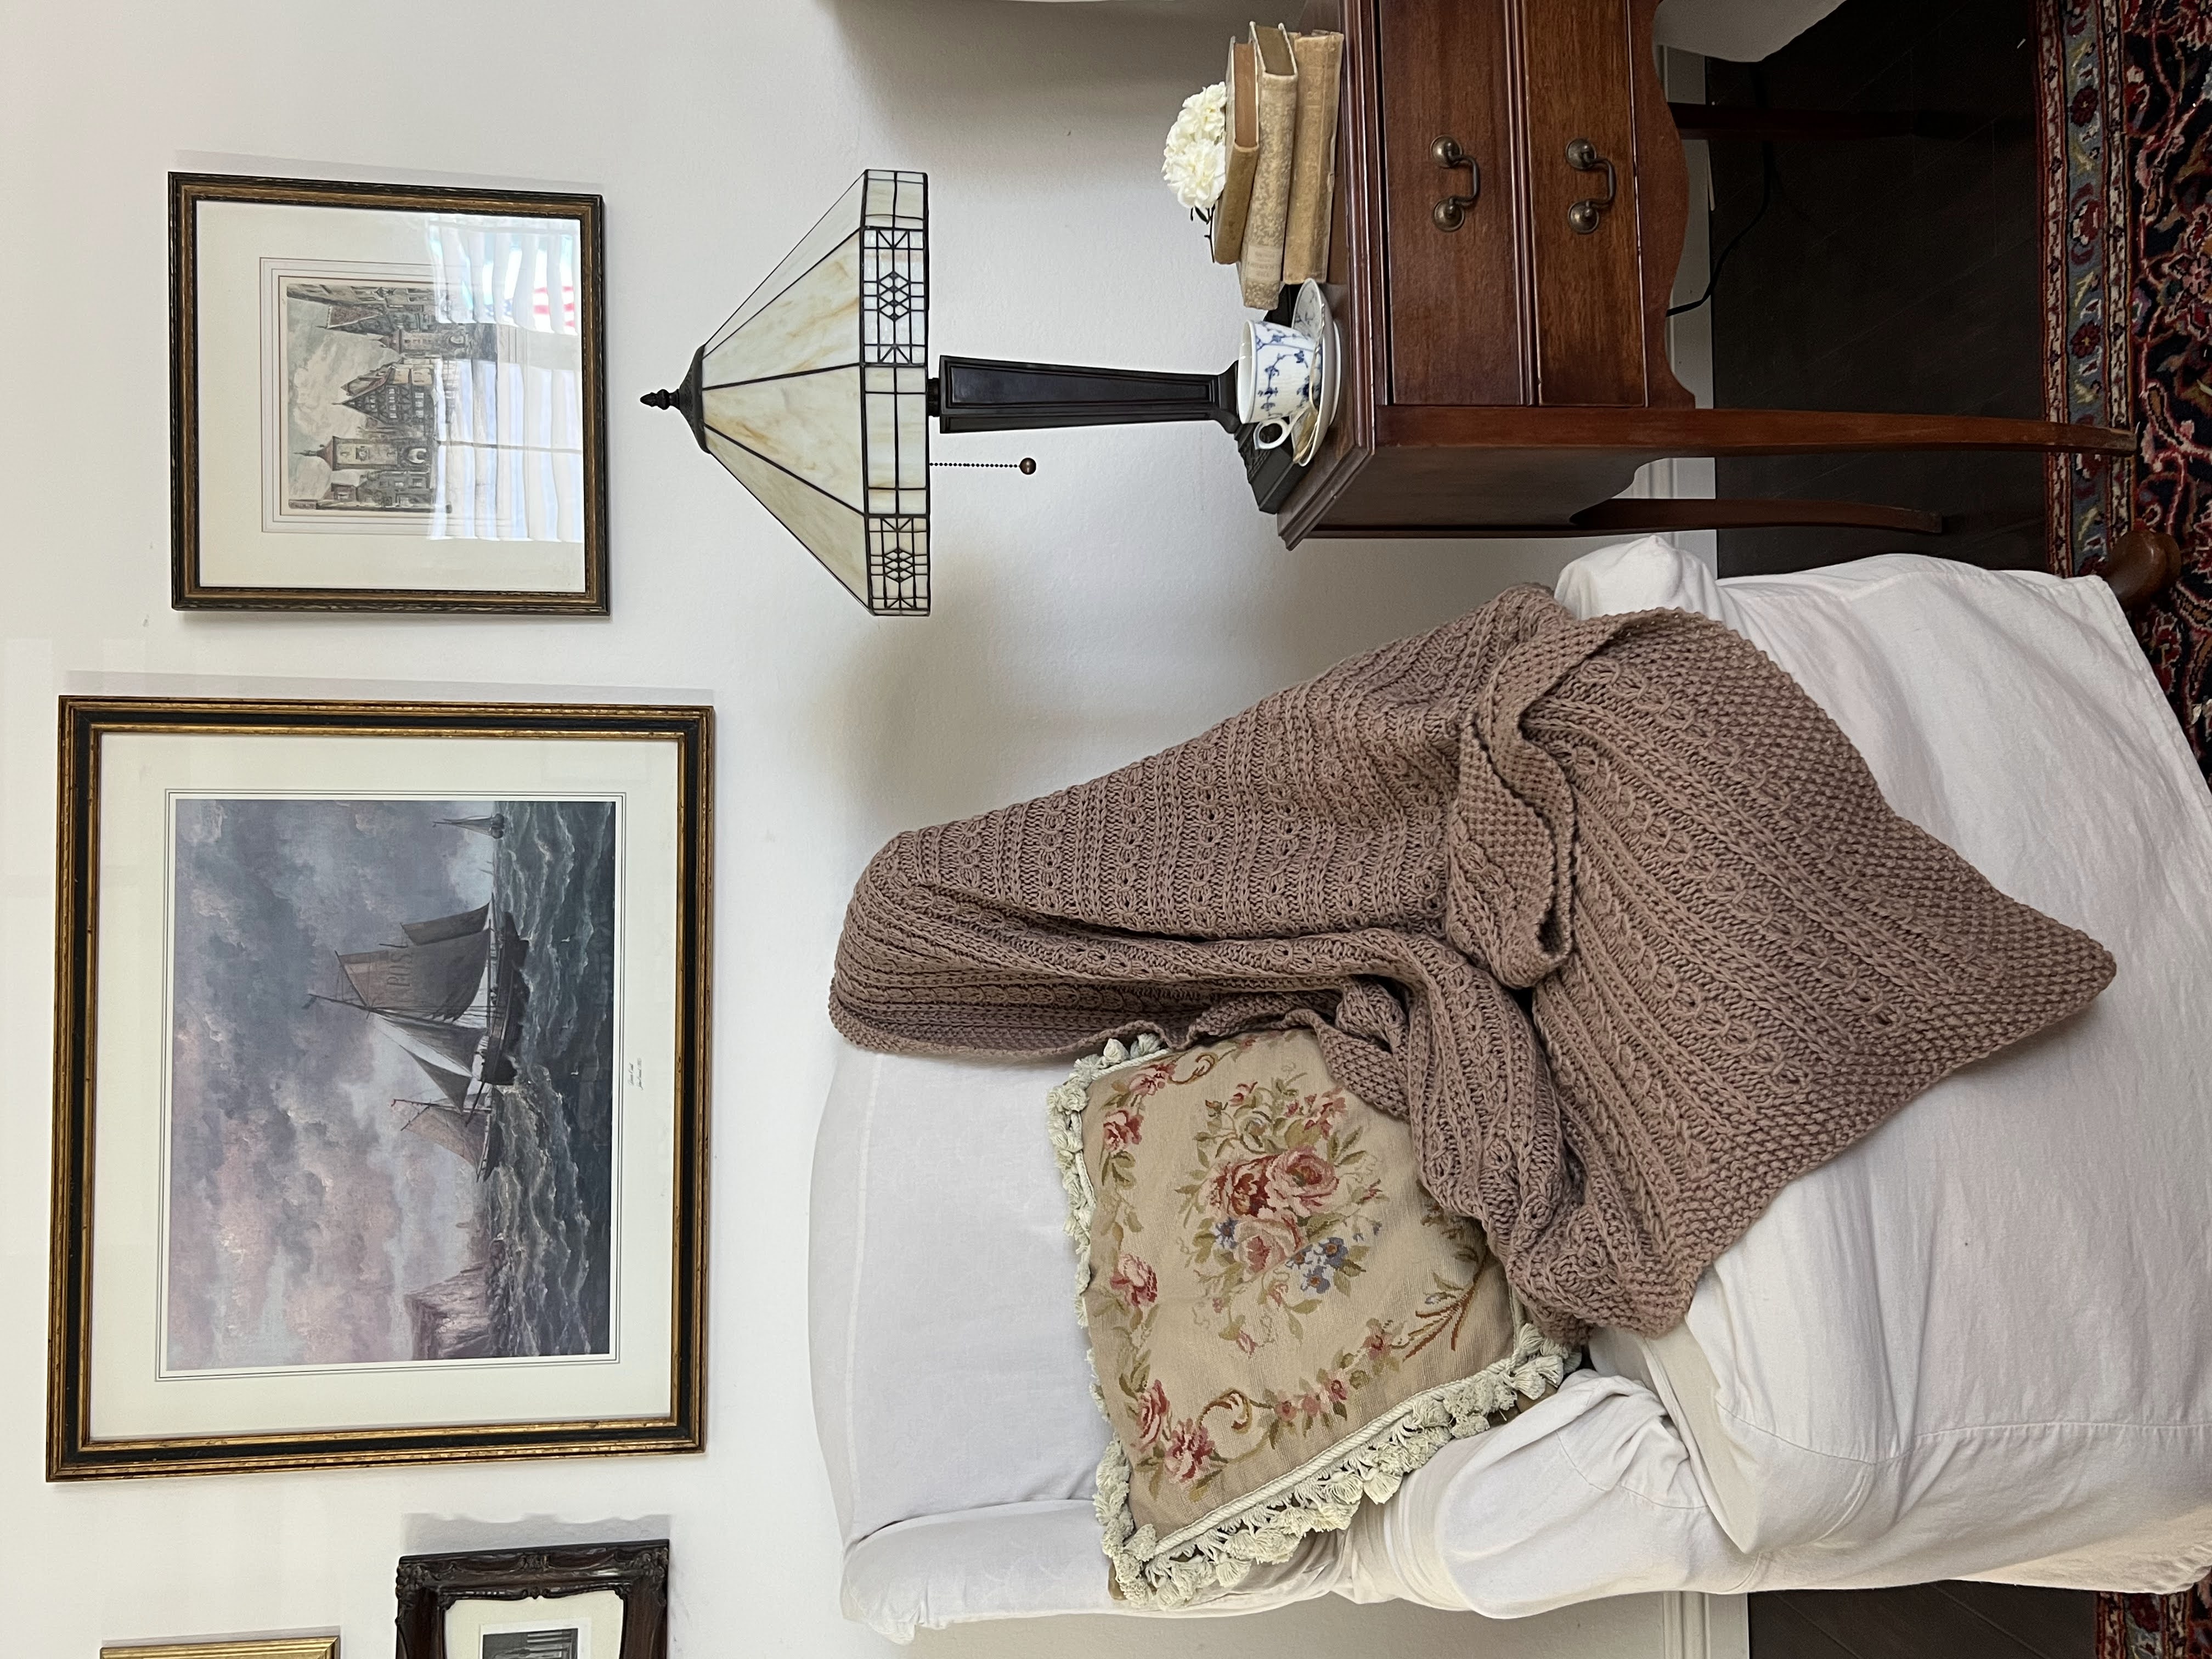 A zoomed out image of the Catalina Eddy Blanket draped across the side and seat of a wing-back chair. Also in the image are an antique table, a glass-shaded lamp, and antique prints on the wall.